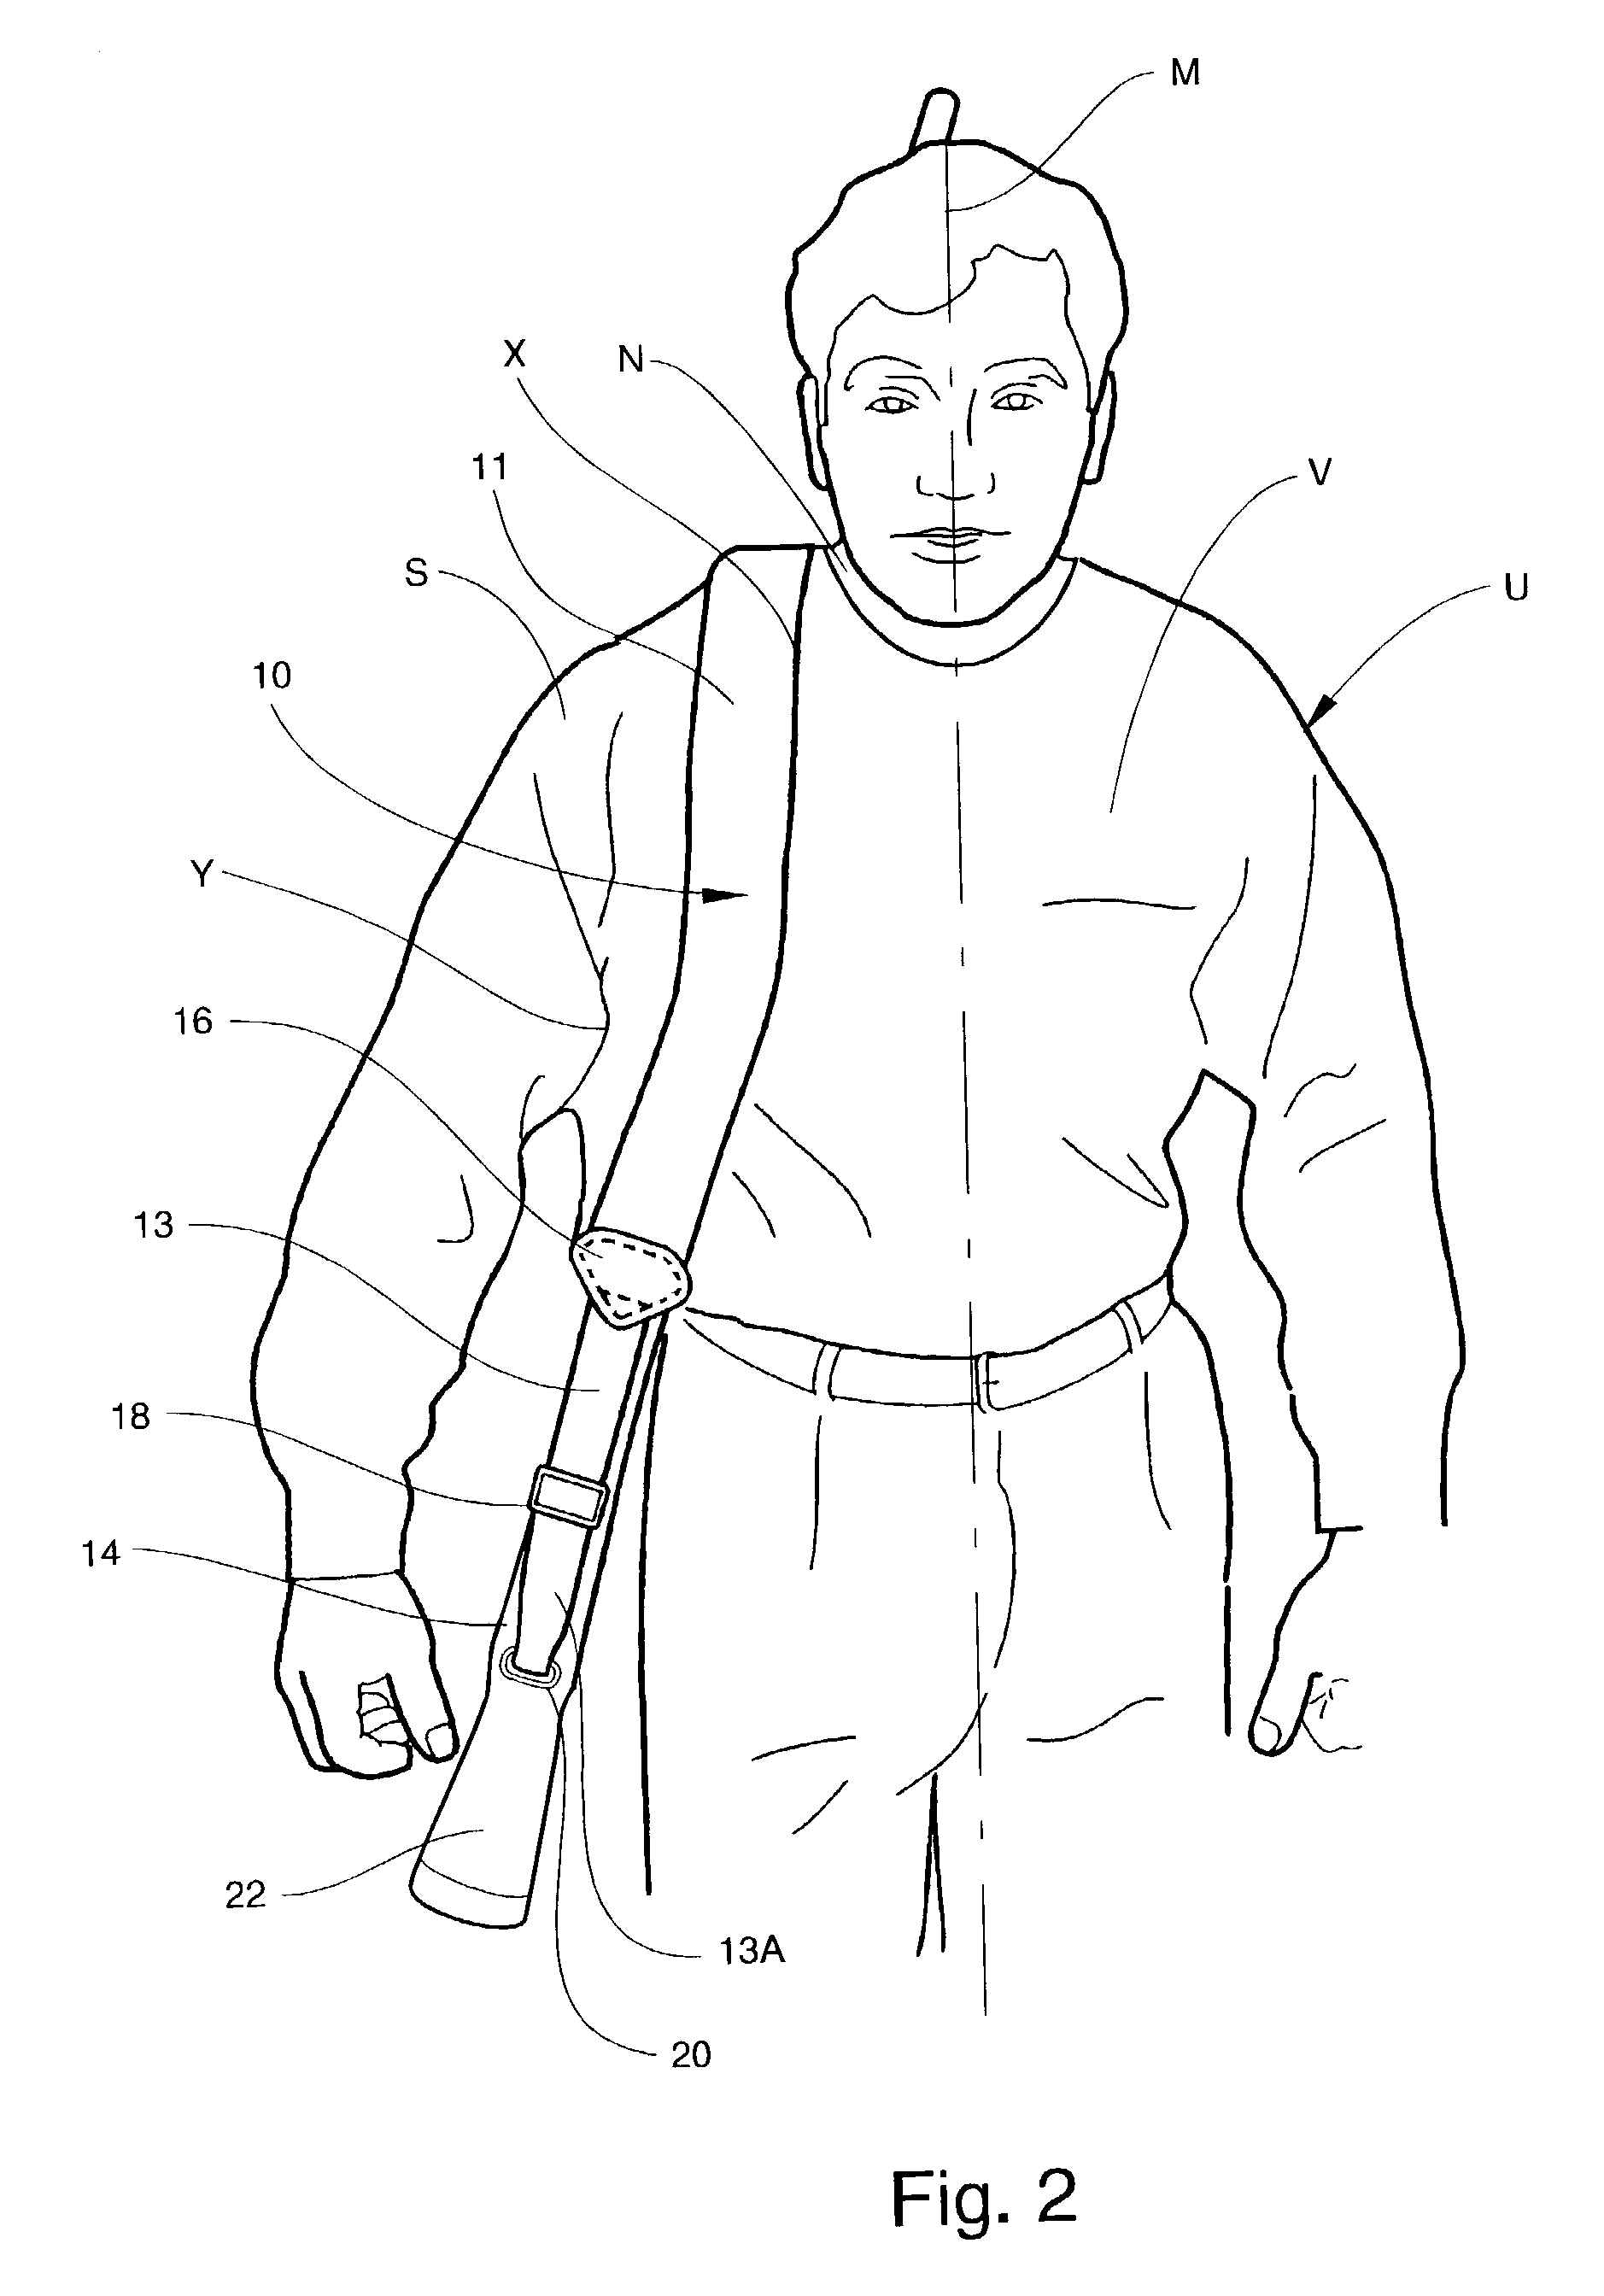 Ergonomically curved weapon sling